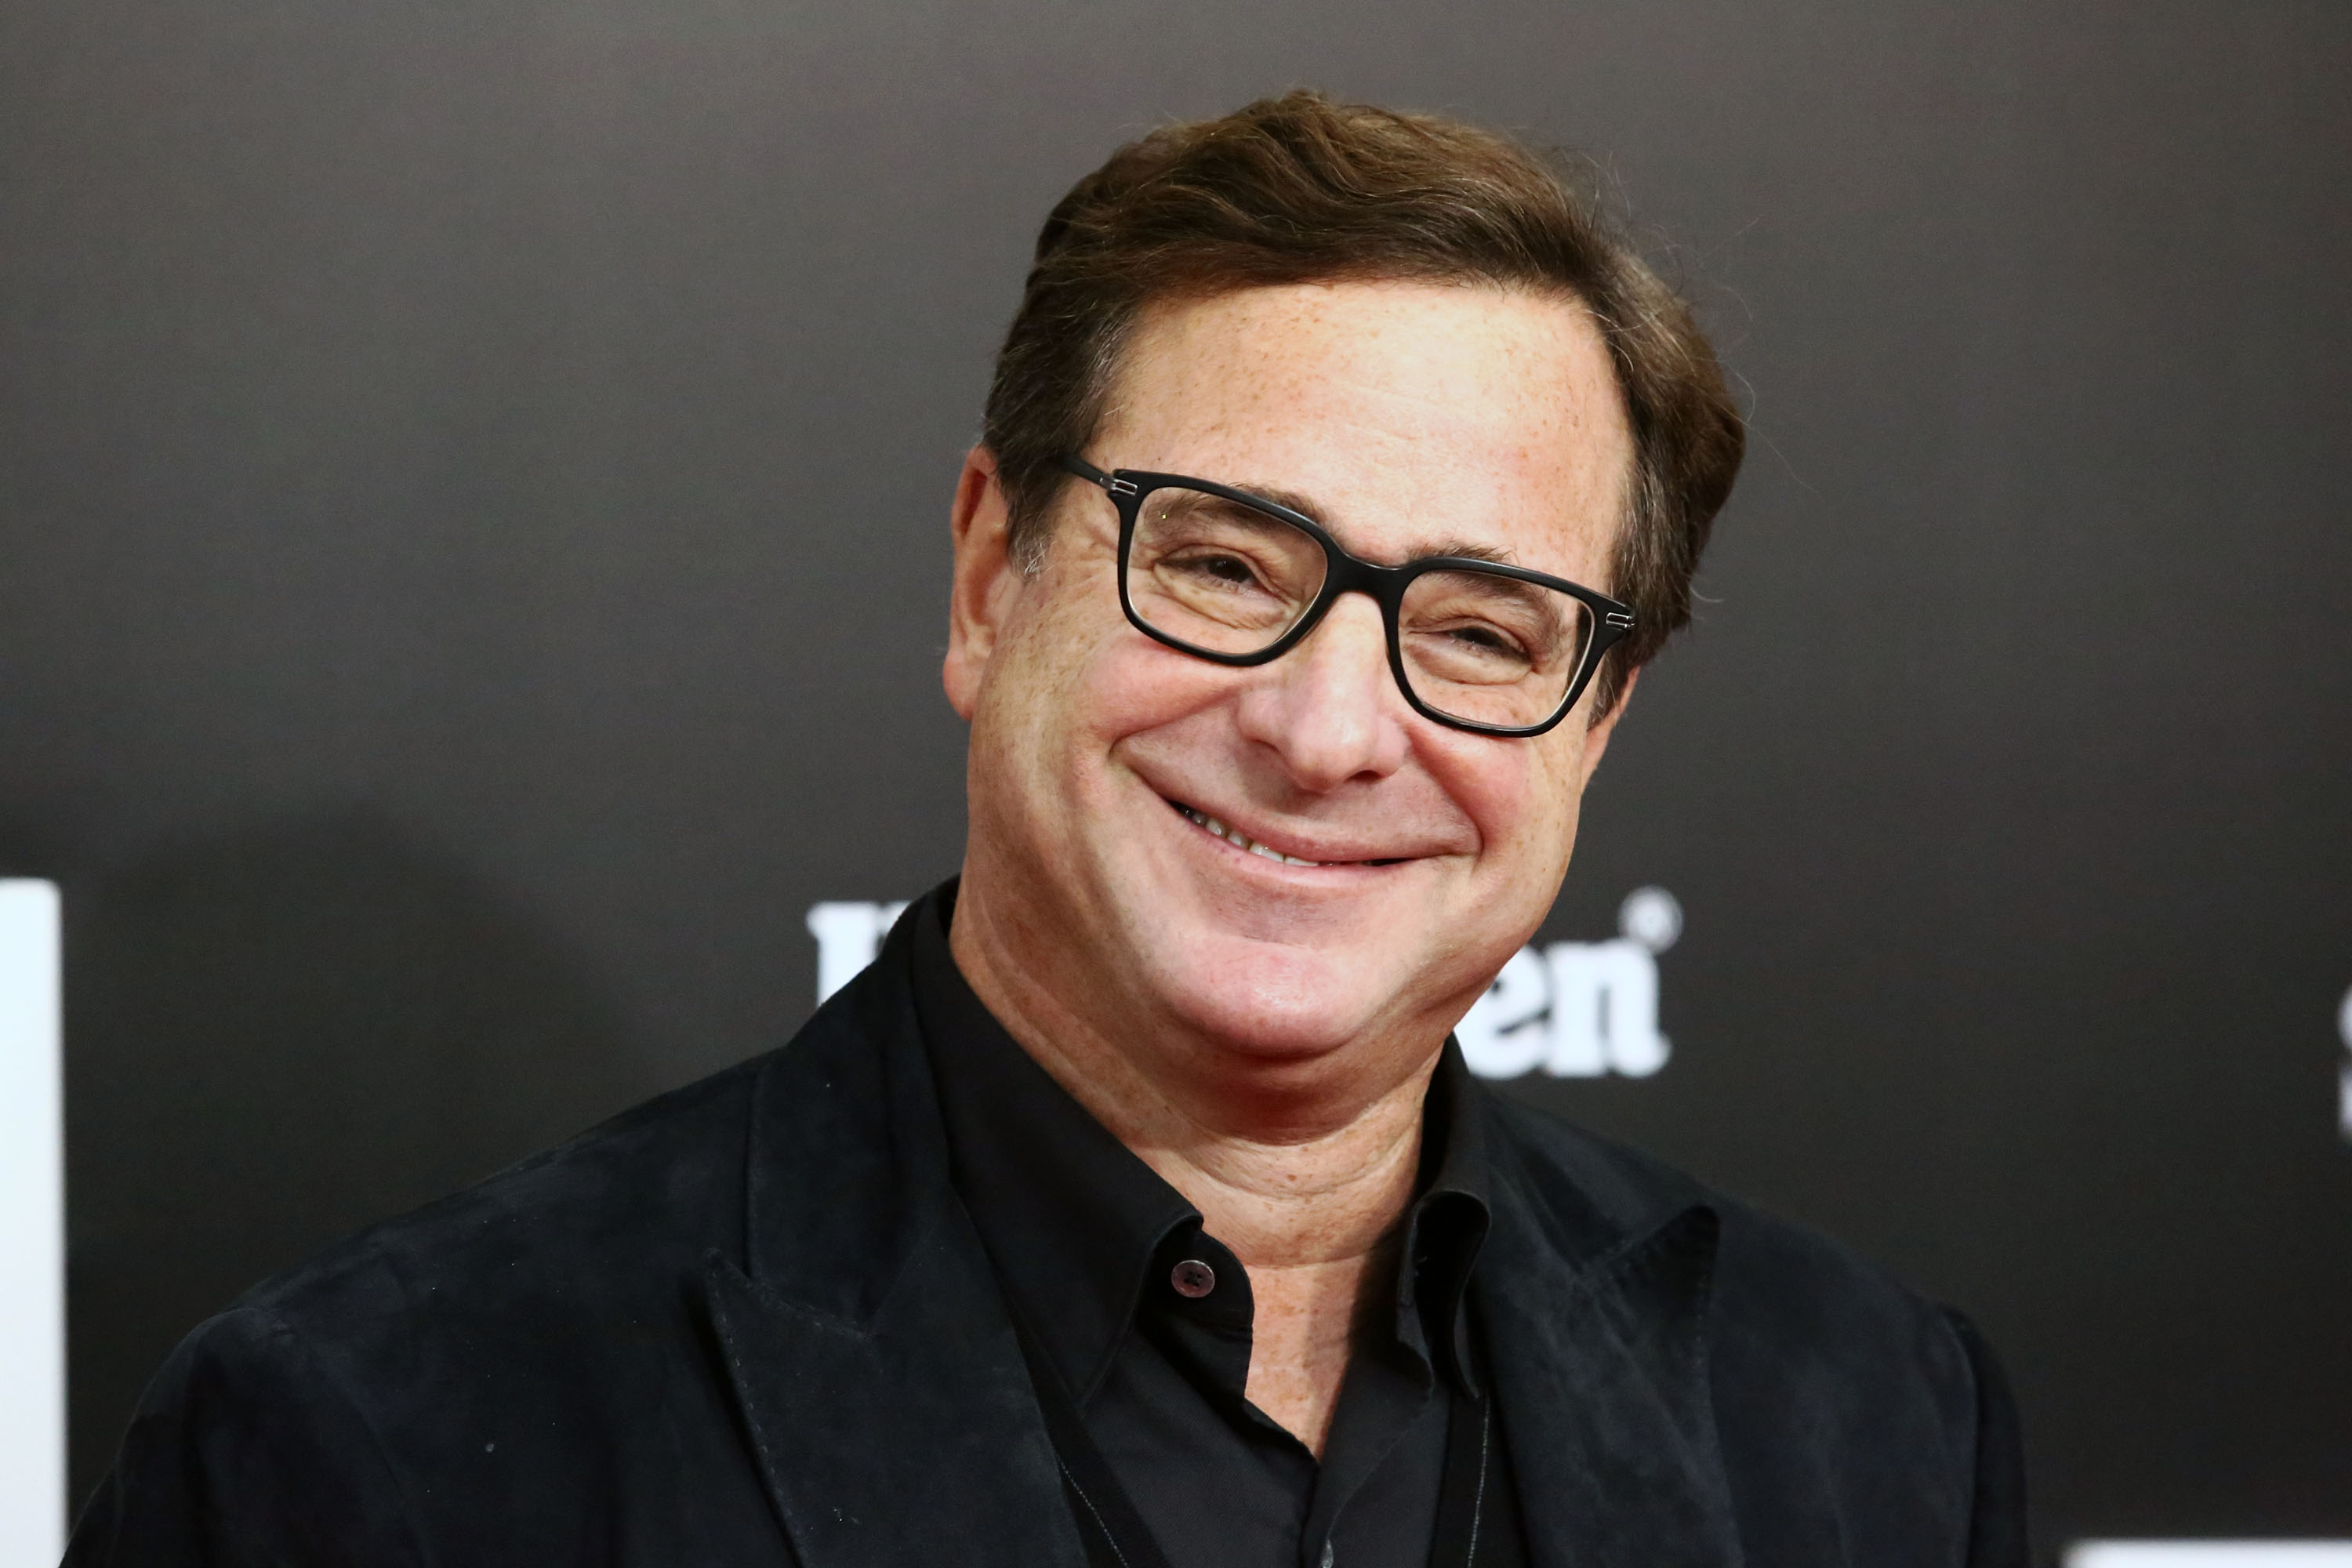 Bob Saget attends "The Big Short" New York premiere at Ziegfeld Theater on November 23, 2015, in New York City. | Source: Getty Images